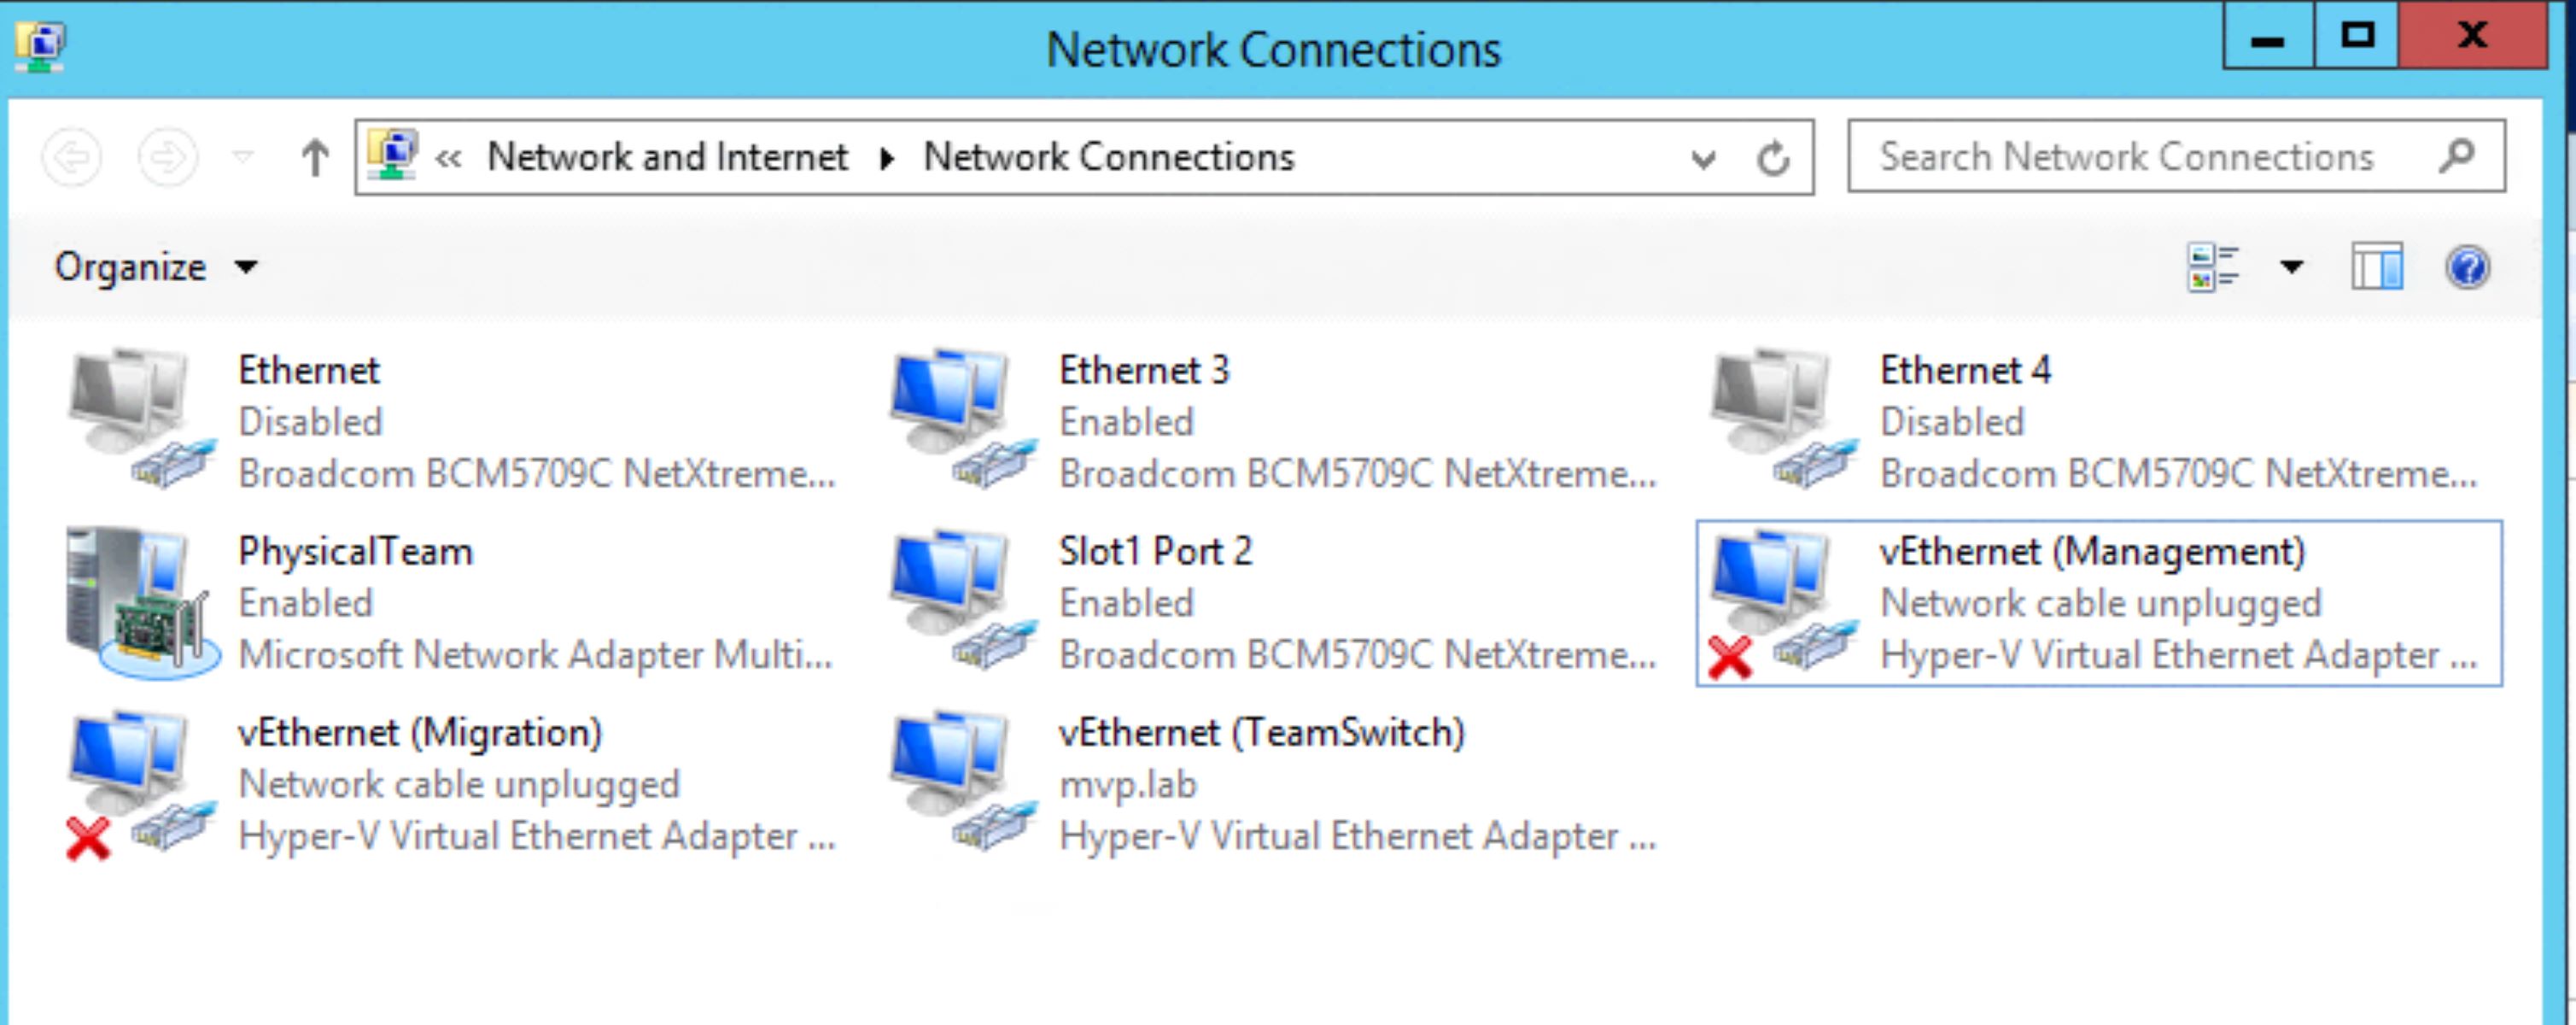 What Is A Hyper-V Virtual Ethernet Adapter